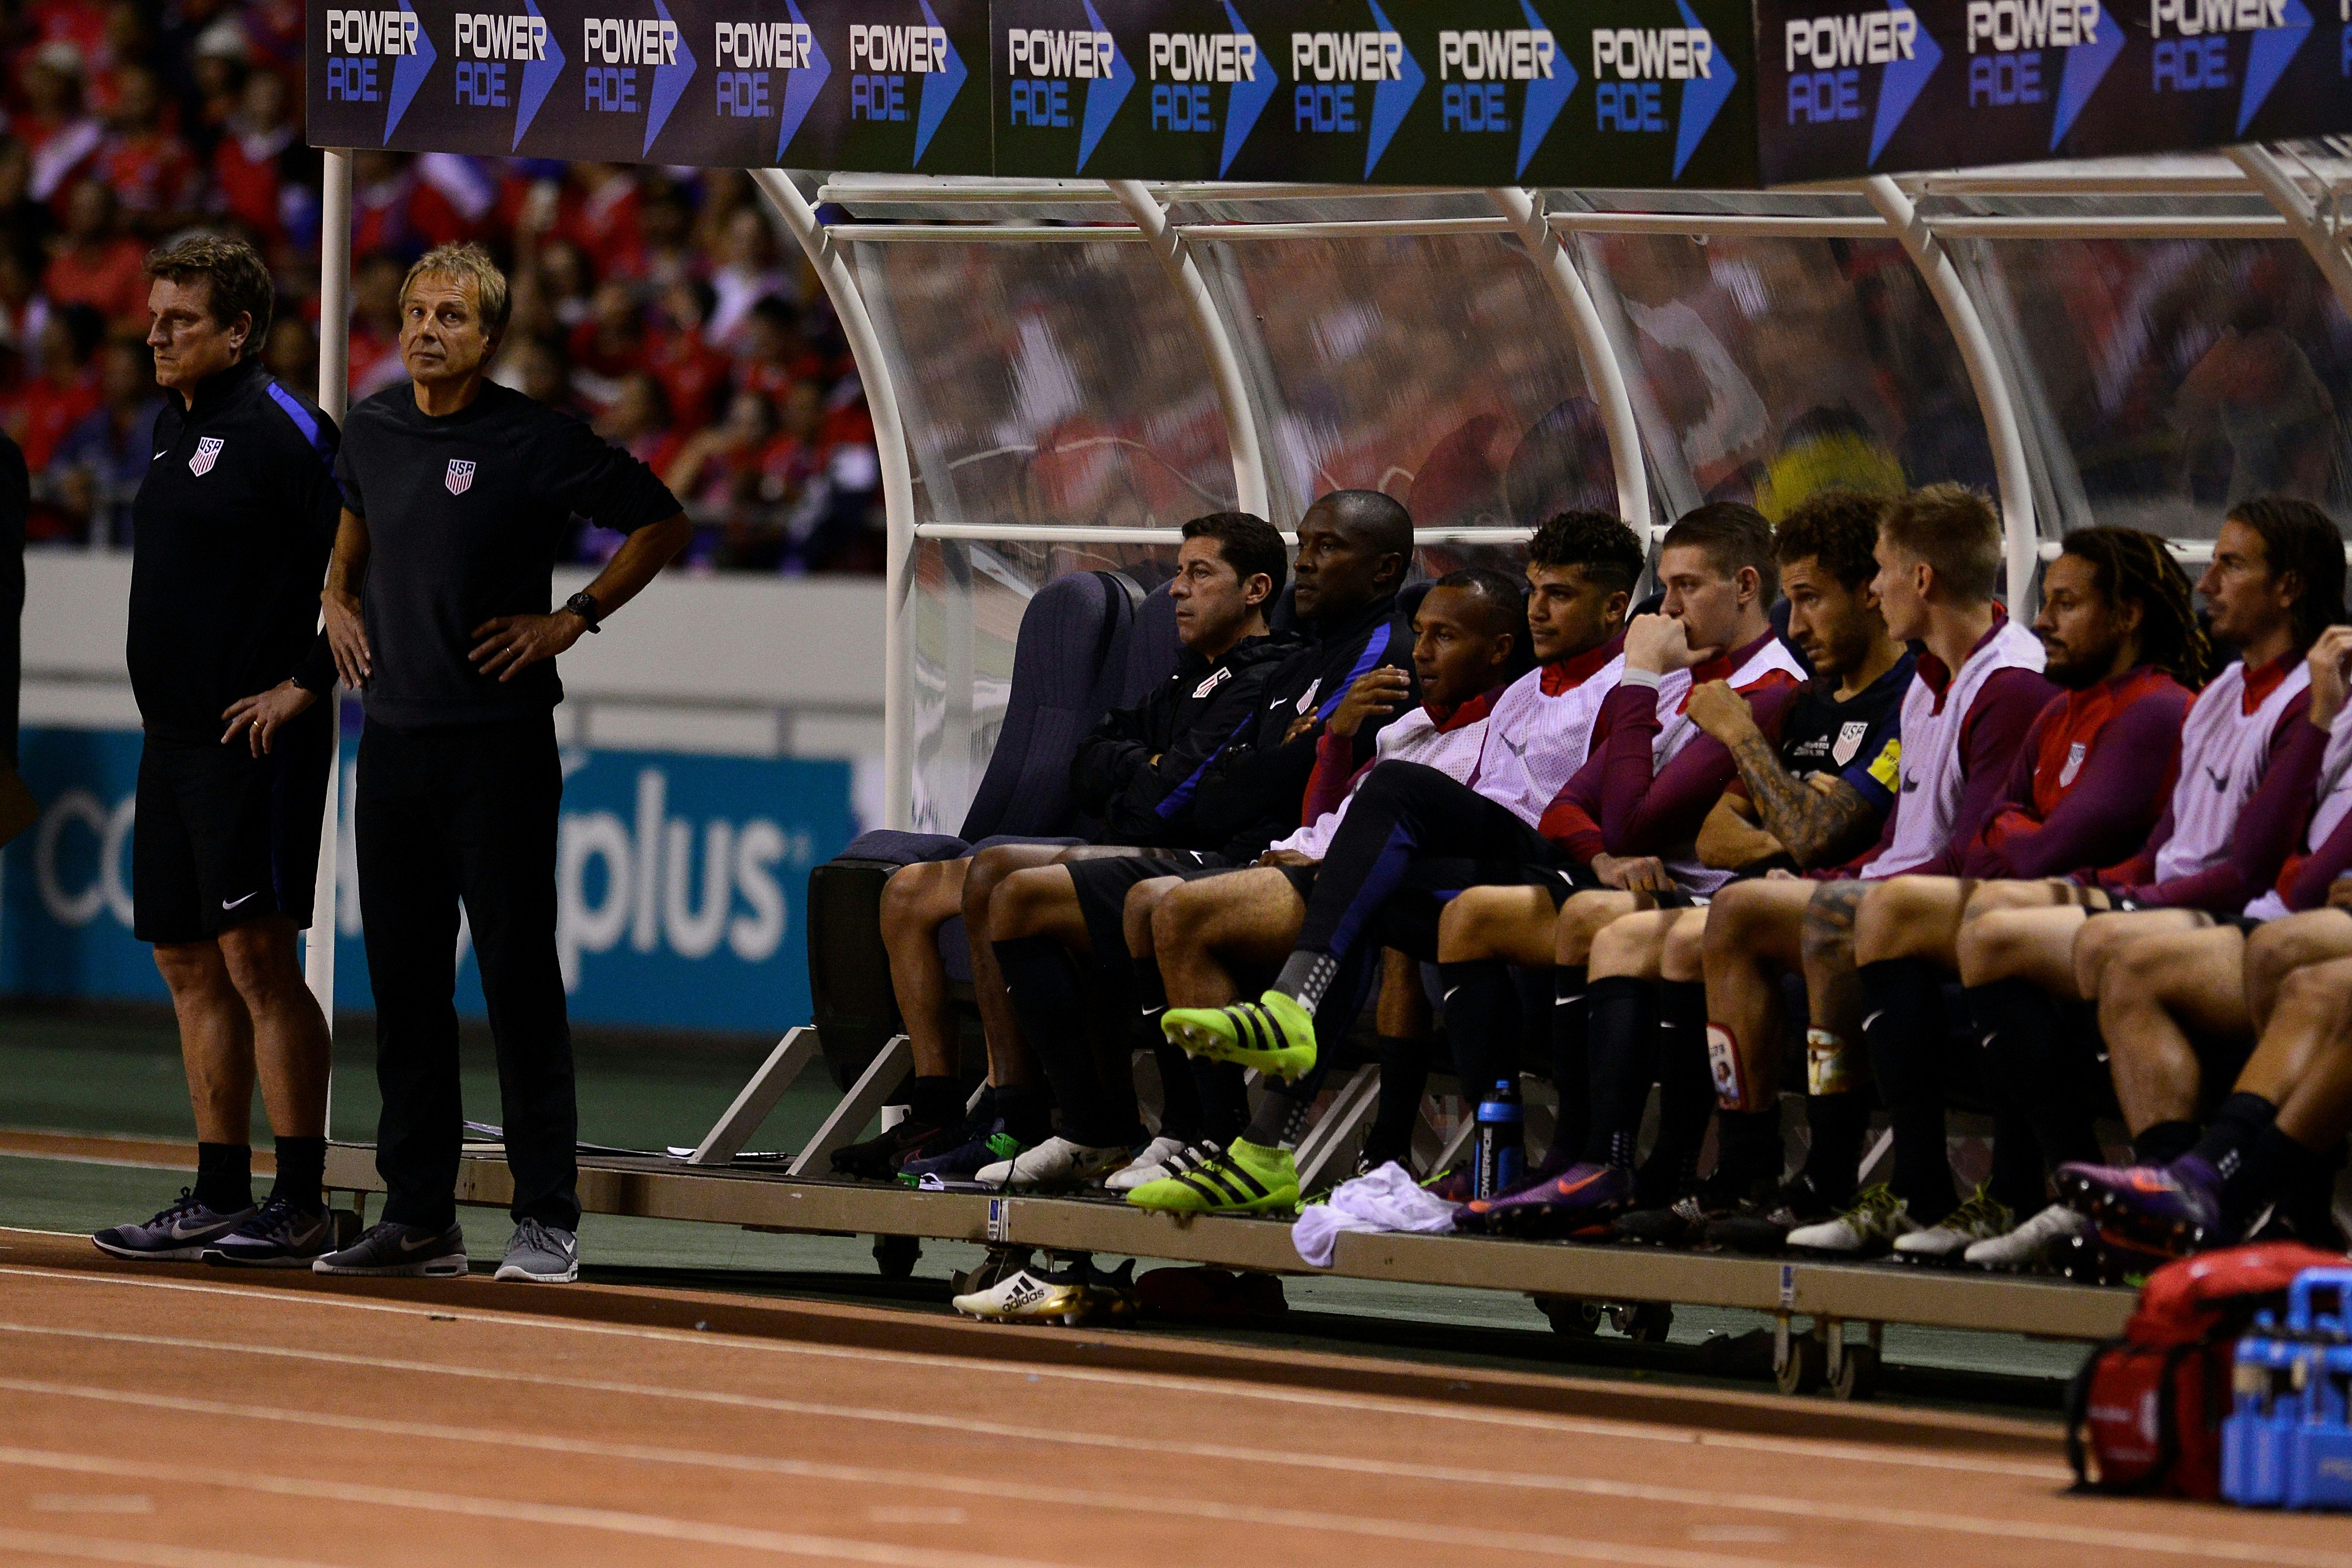 United States' players on the bench react during their 2018 FIFA World Cup qualifier football match against Costa Rica, in San Jose, on November 15, 2016. (EZEQUIEL BECERRA—AFP/Getty Images)